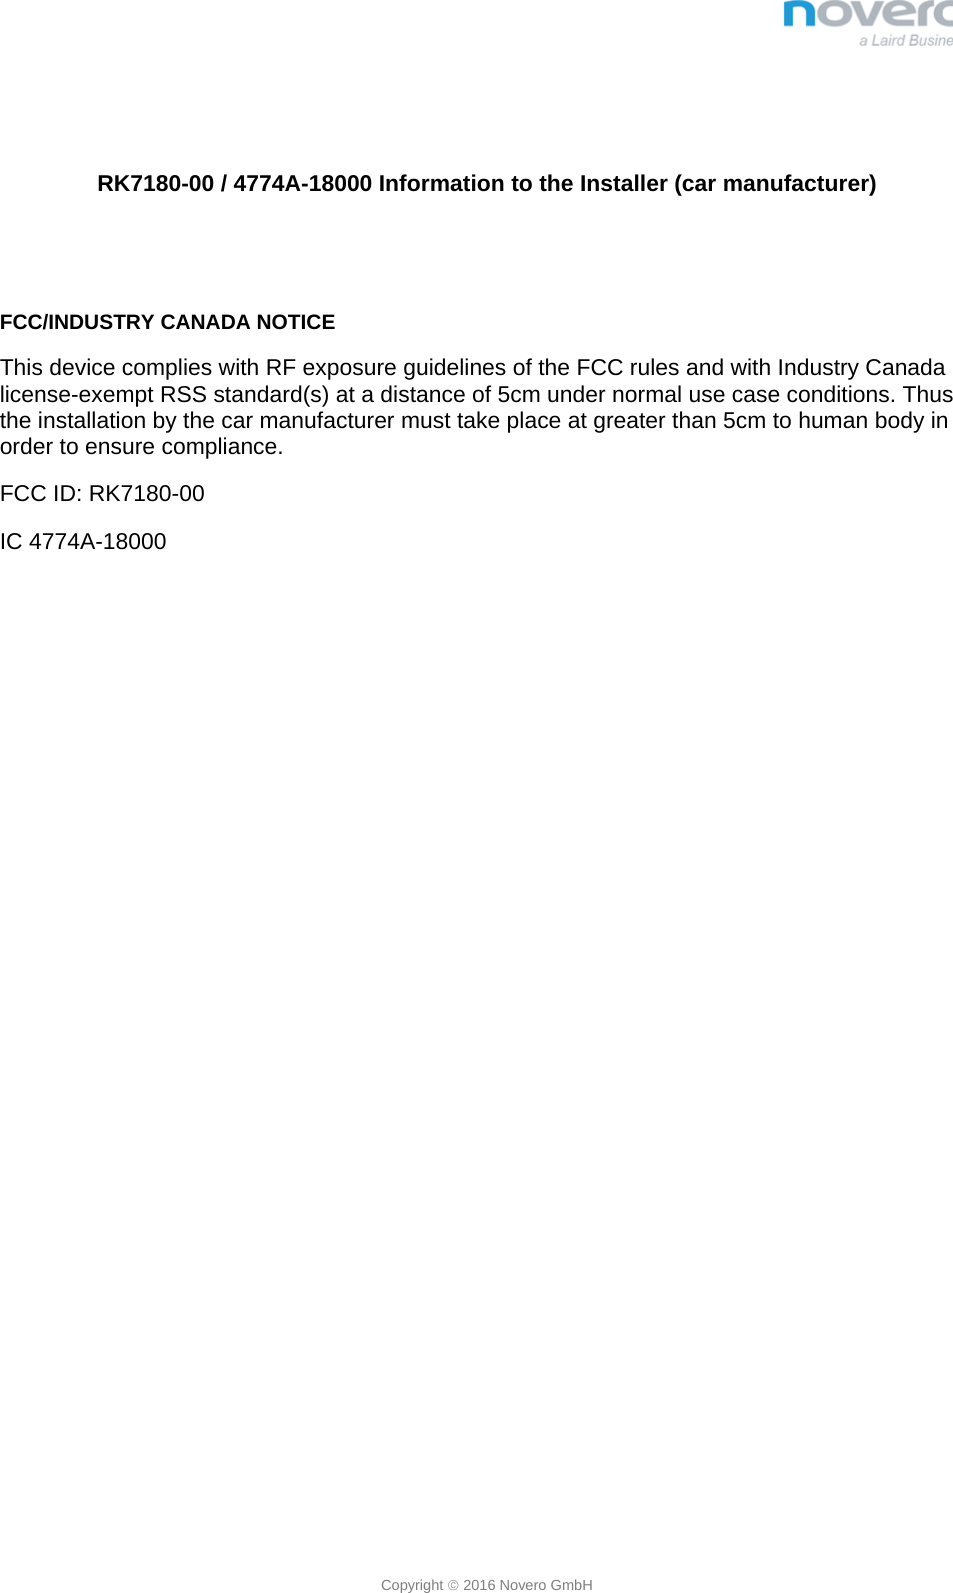  Copyright  2016 Novero GmbH   RK7180-00 / 4774A-18000 Information to the Installer (car manufacturer)   FCC/INDUSTRY CANADA NOTICE This device complies with RF exposure guidelines of the FCC rules and with Industry Canada license-exempt RSS standard(s) at a distance of 5cm under normal use case conditions. Thus the installation by the car manufacturer must take place at greater than 5cm to human body in order to ensure compliance. FCC ID: RK7180-00 IC 4774A-18000 